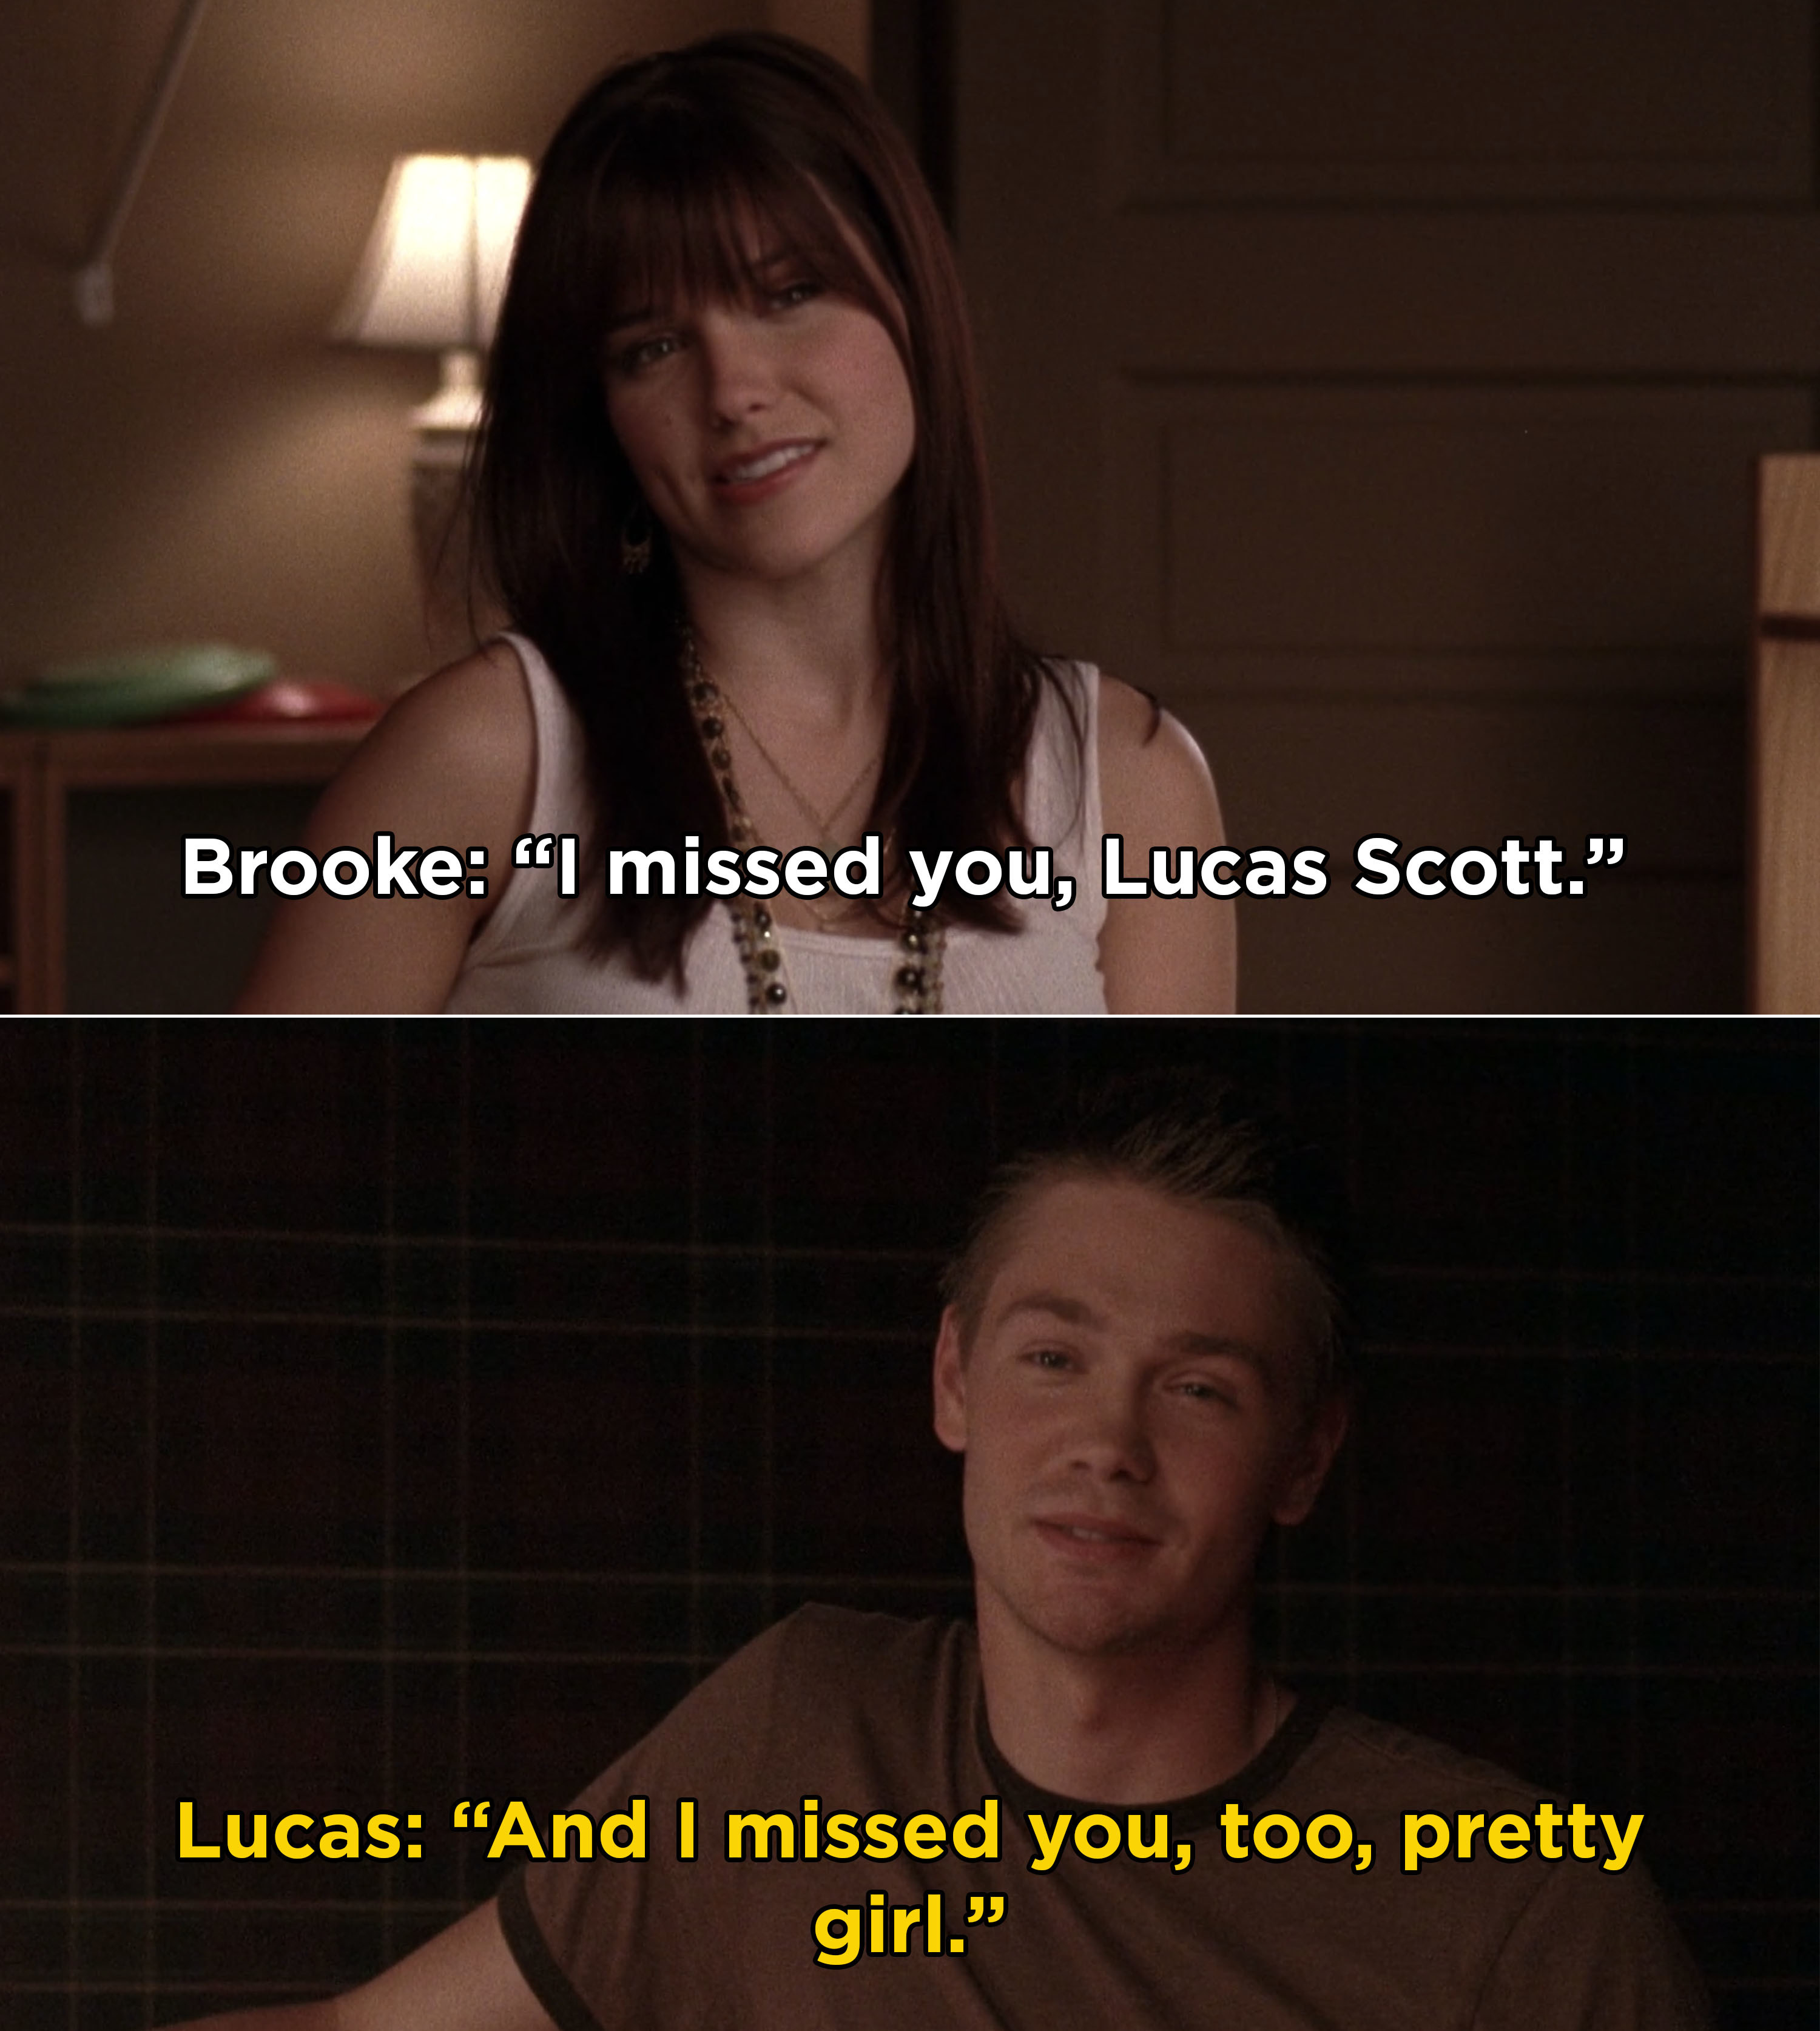 Brooke telling Lucas that she misses him and Lucas responding, &quot;And I missed you, too, pretty girl&quot;